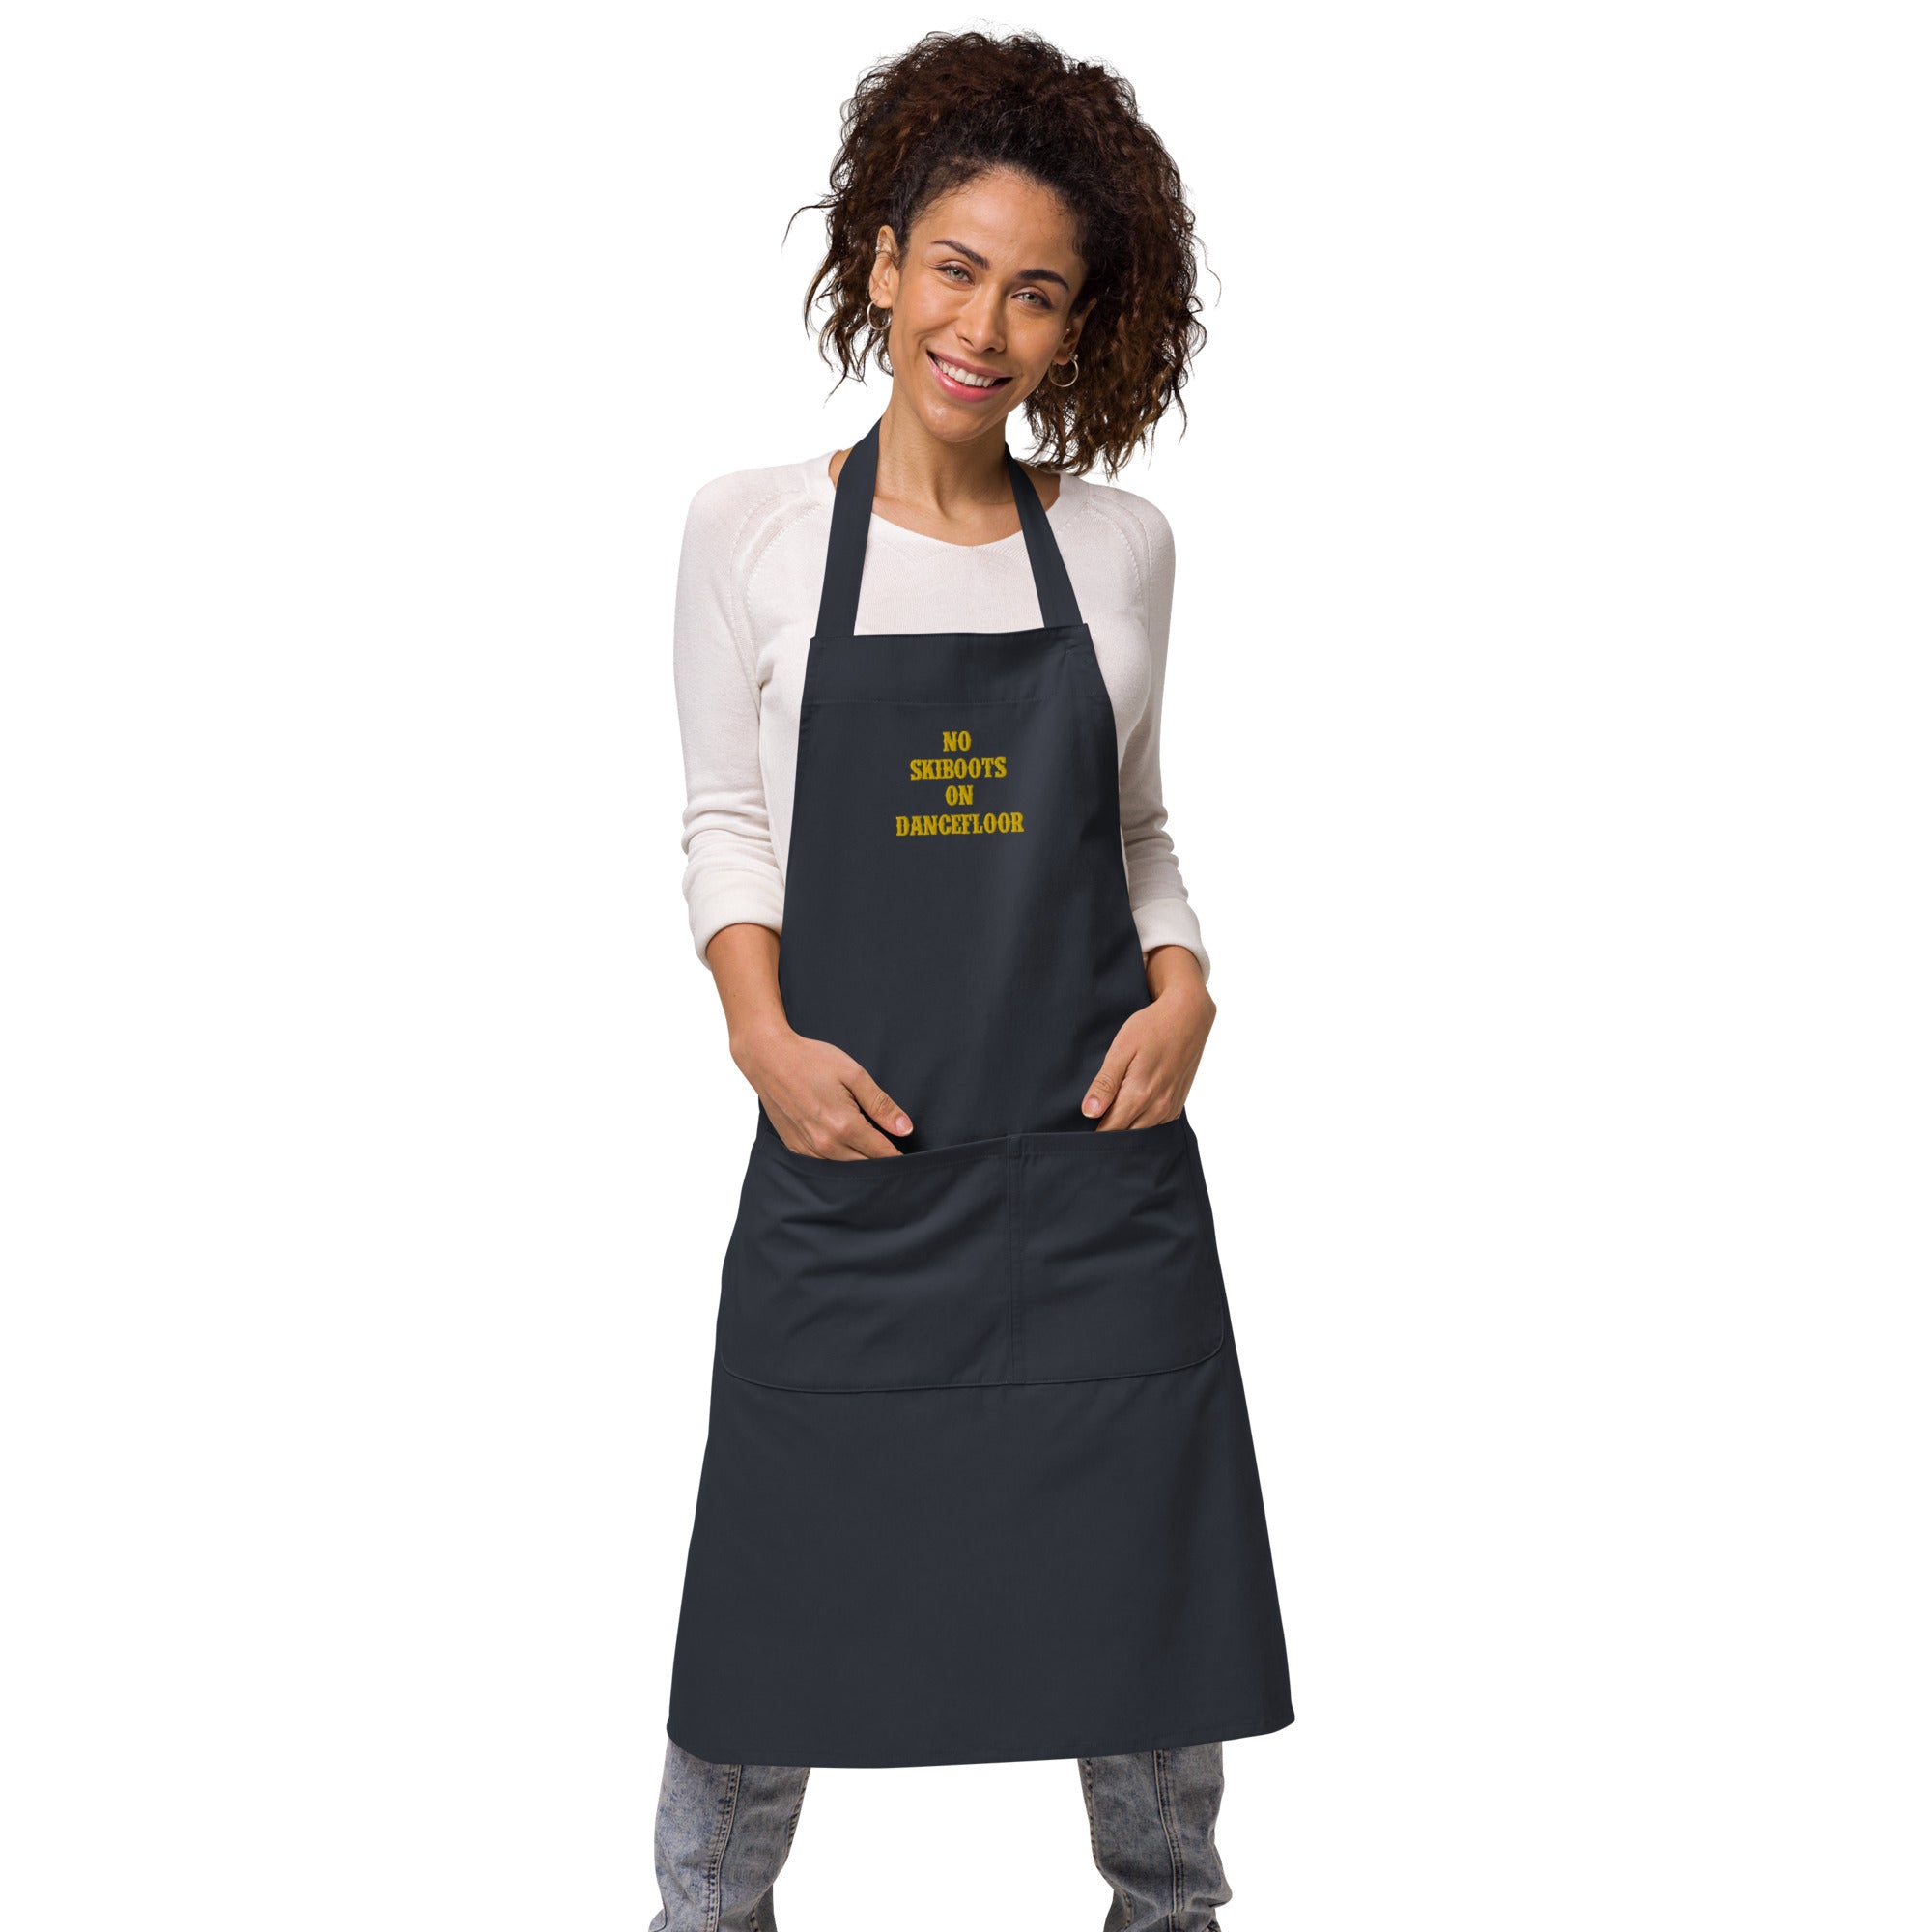 Organic cotton apron No Skiboots on Dancefloor gold embroidered pattern